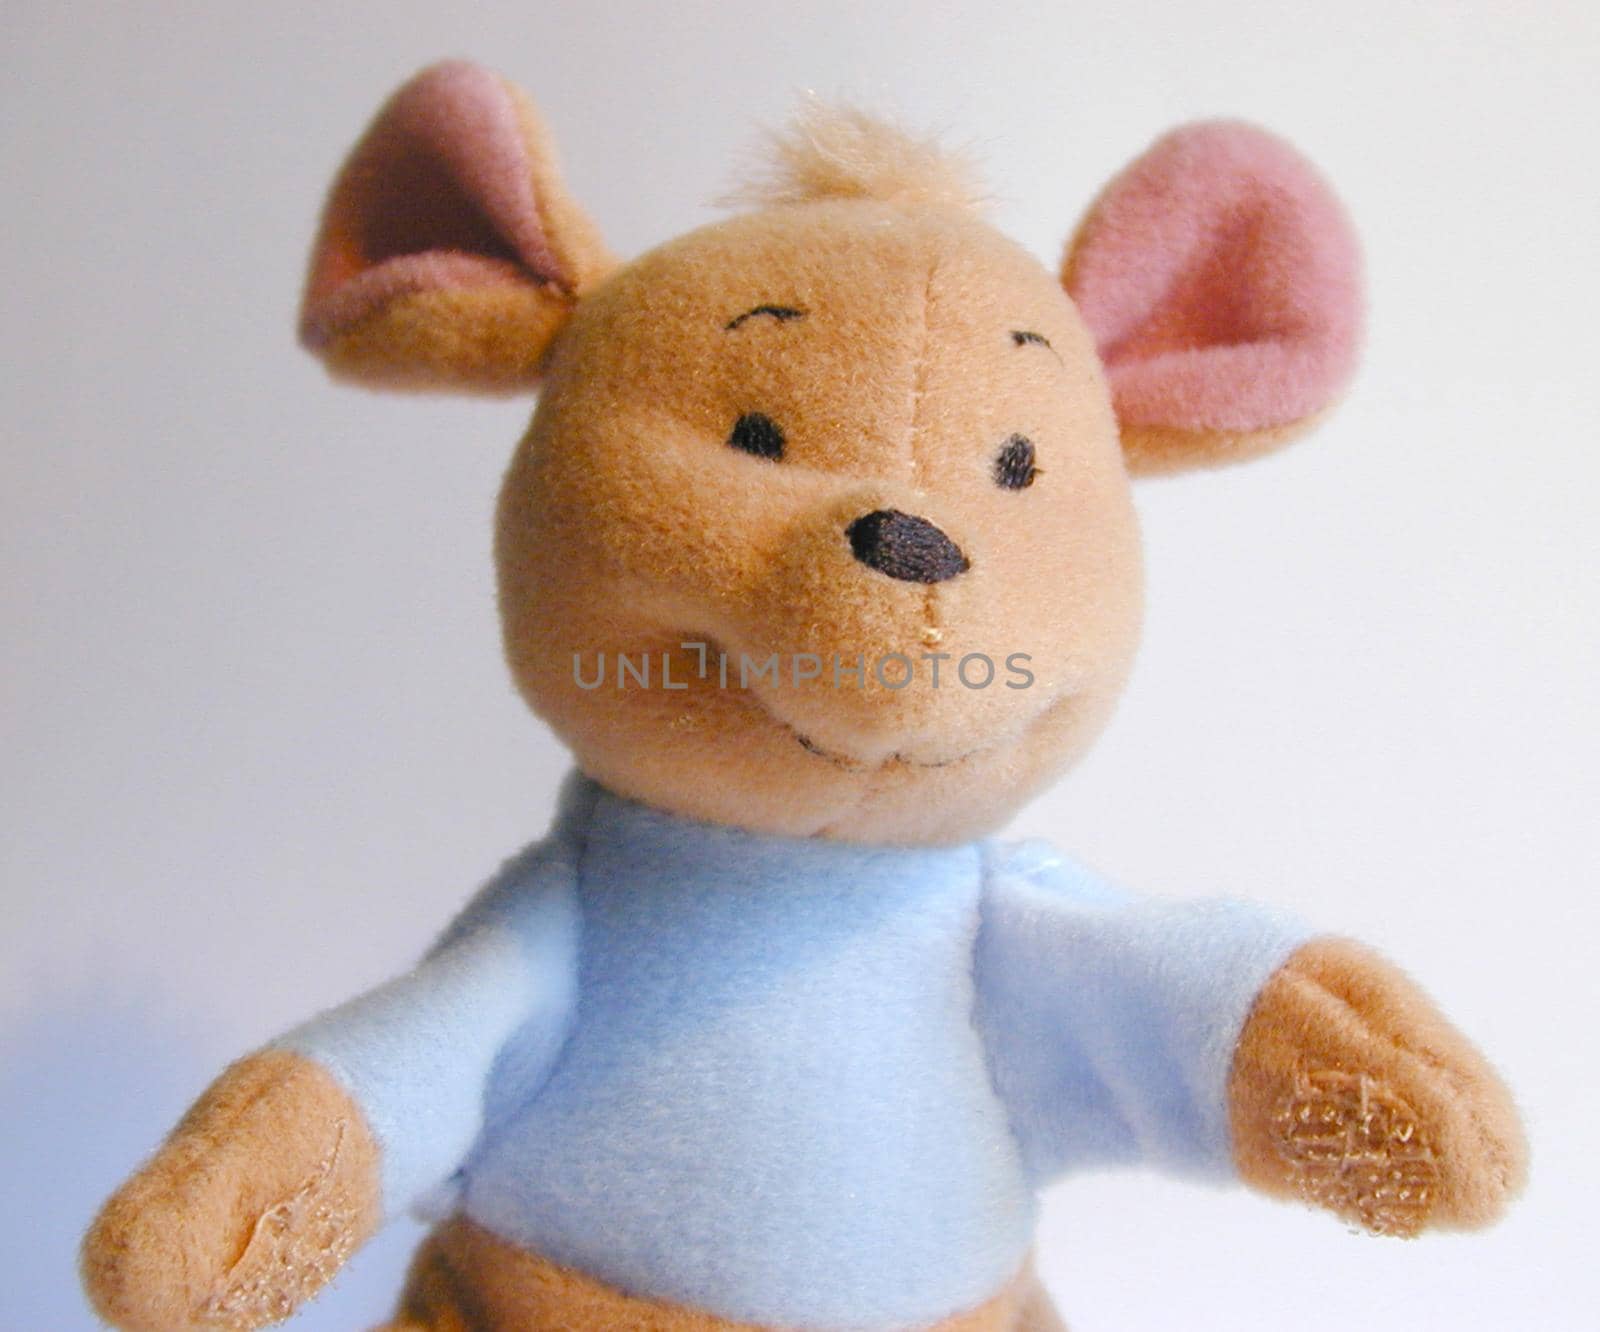 Cute little soft stuffed kangaroo toy with a happy smile wearing a blue jacket, closeup of the head and arms